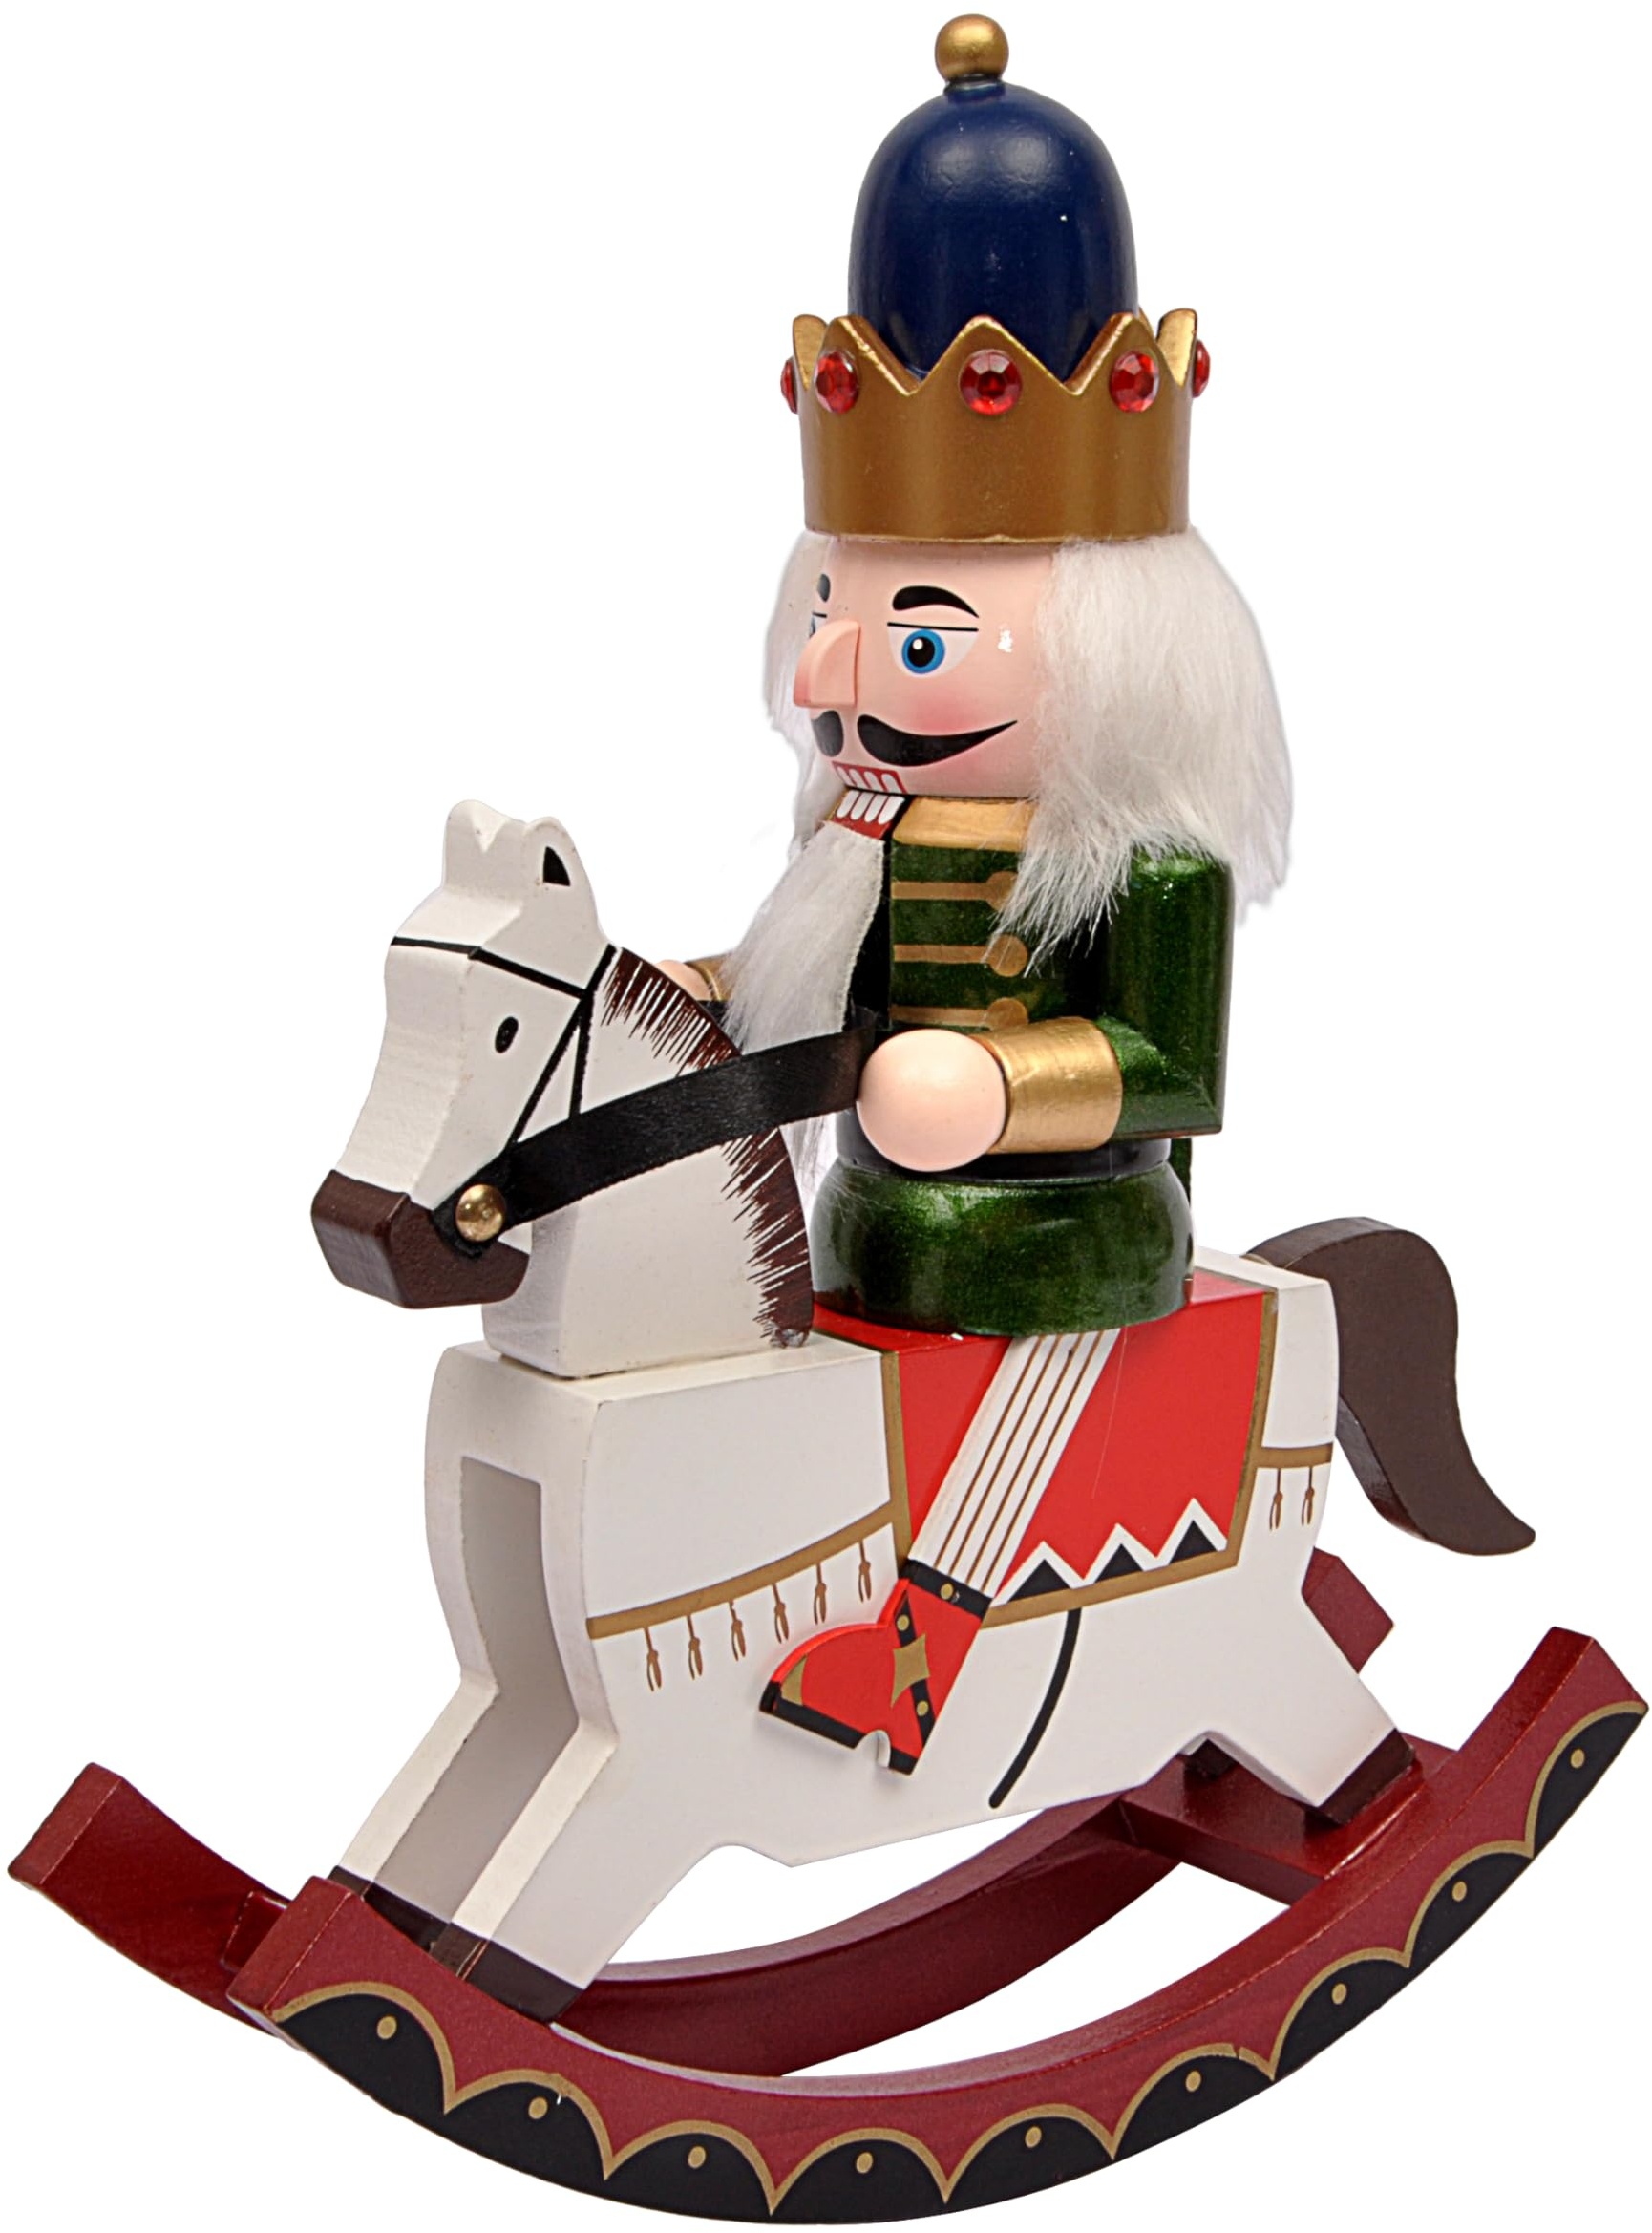 Ciao Christmas Nutcracker Toy Soldier King on Horseback (28cm) Wooden Decoration with Fabric, Green/Blue